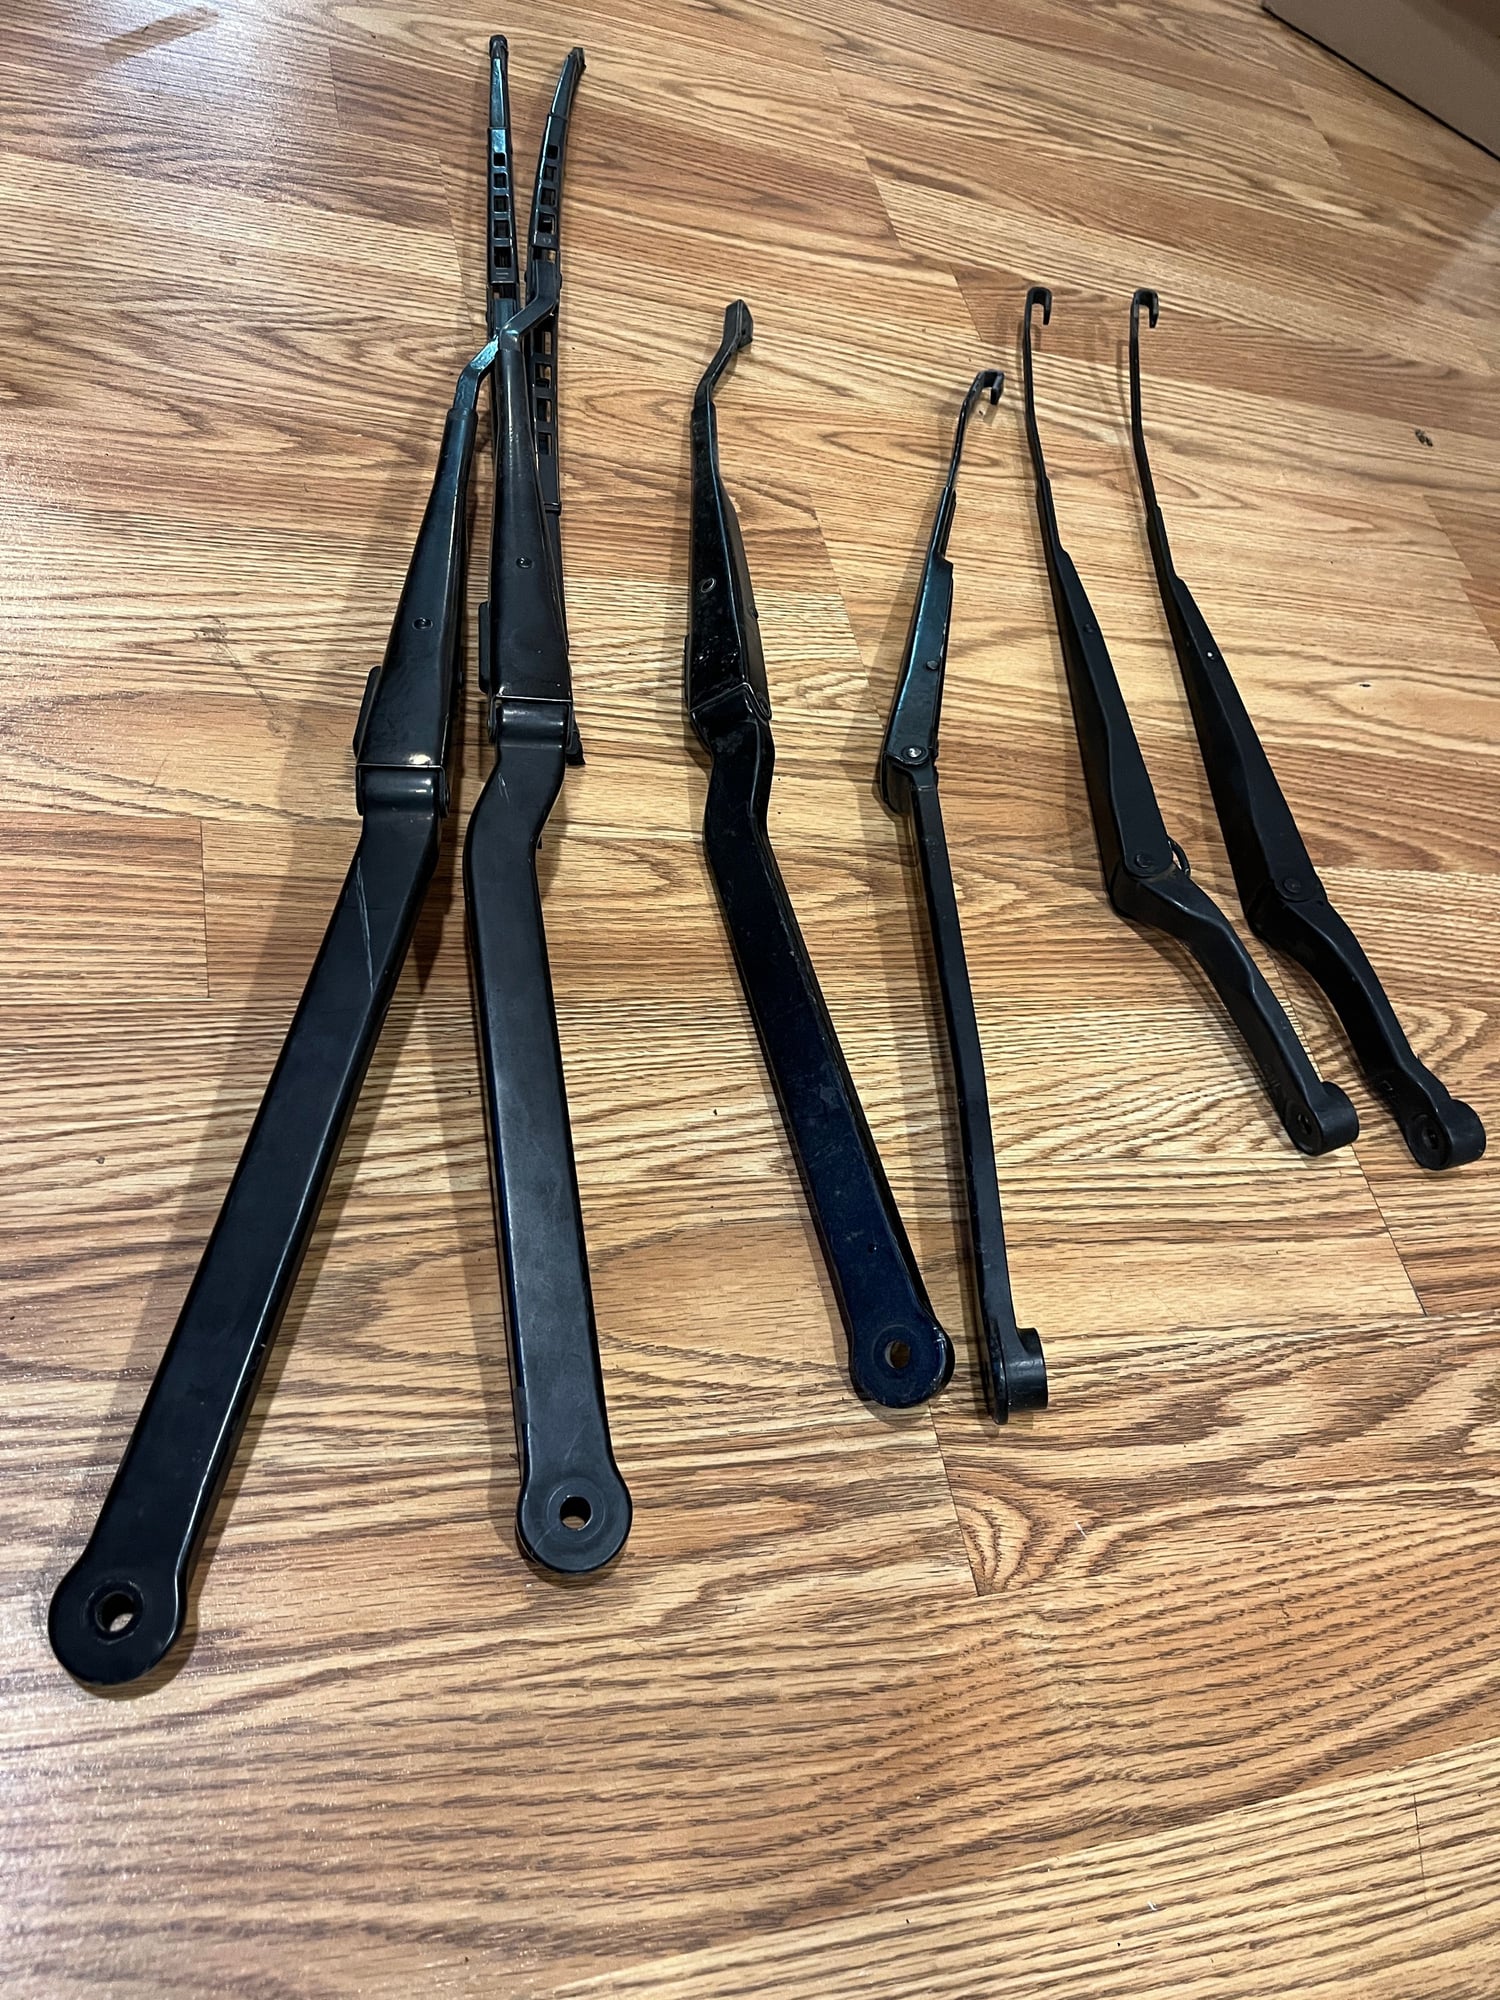 Miscellaneous - Windshield Wipers - Used - 1985 to 1991 Mazda RX-7 - New Canaan, CT 06840, United States